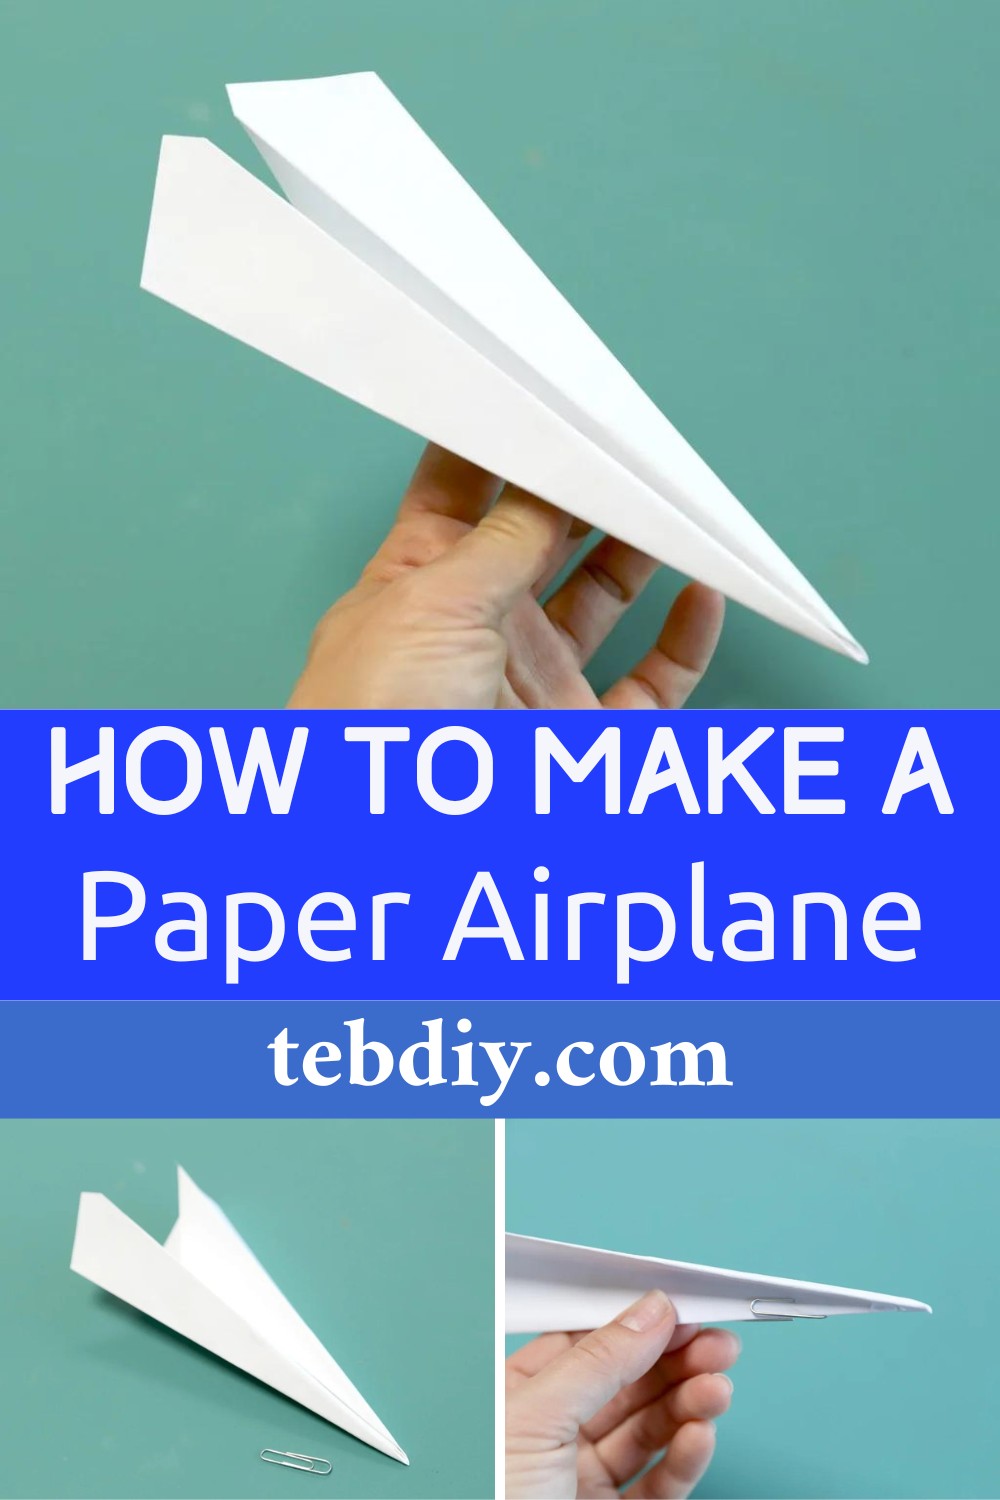 How To Make The Fastest Paper Airplane